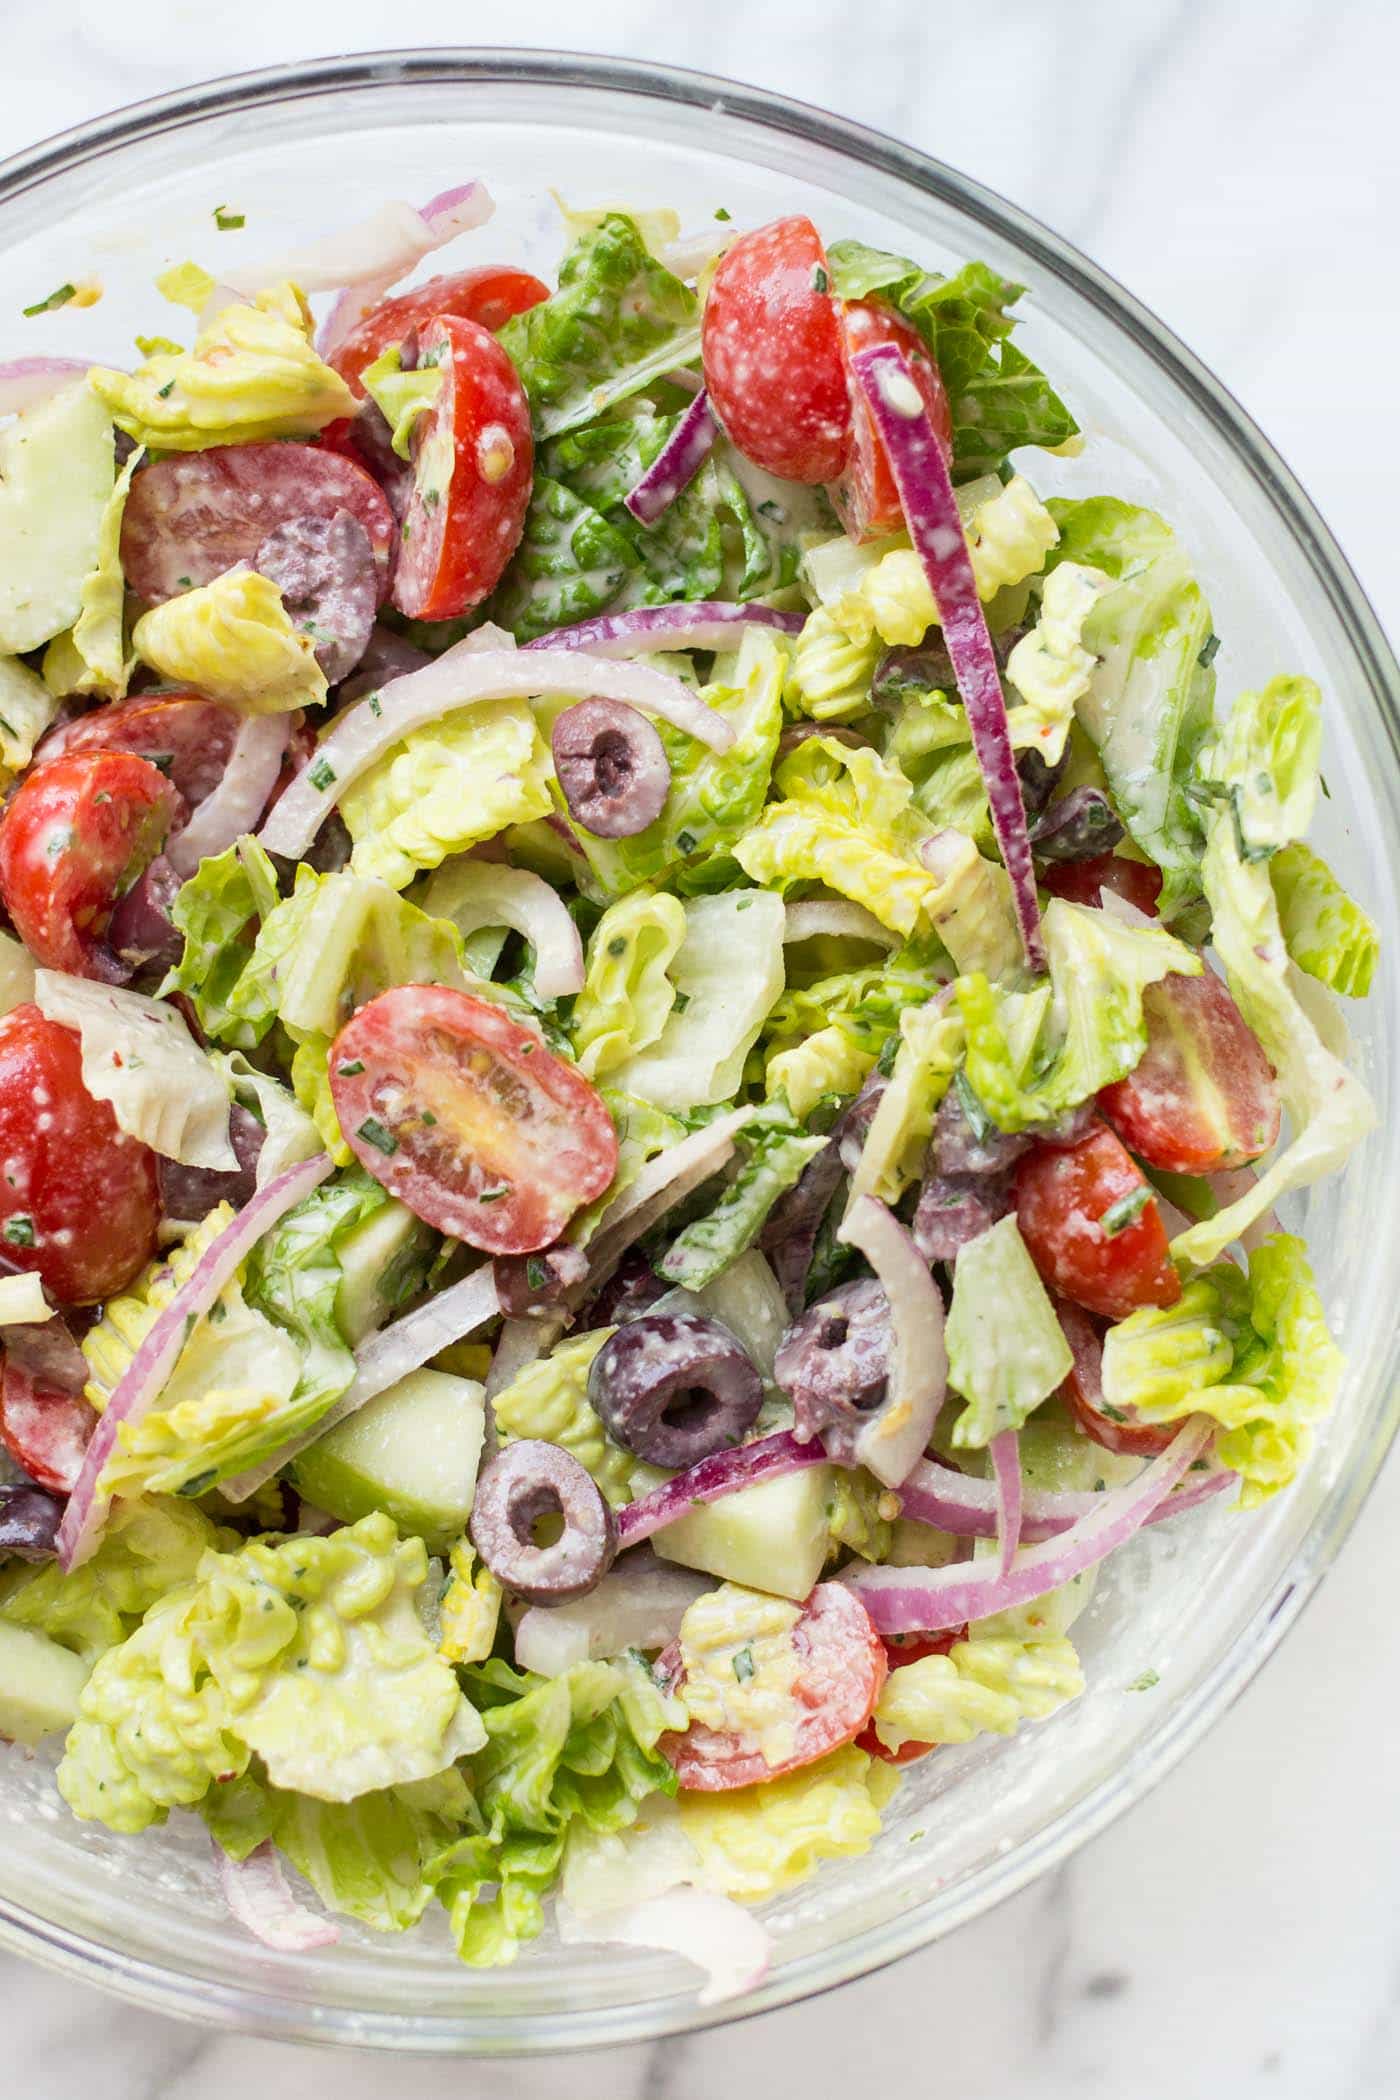 This naturally vegan chopped salad is so easy to make, healthy and absolutely DELICIOUS!